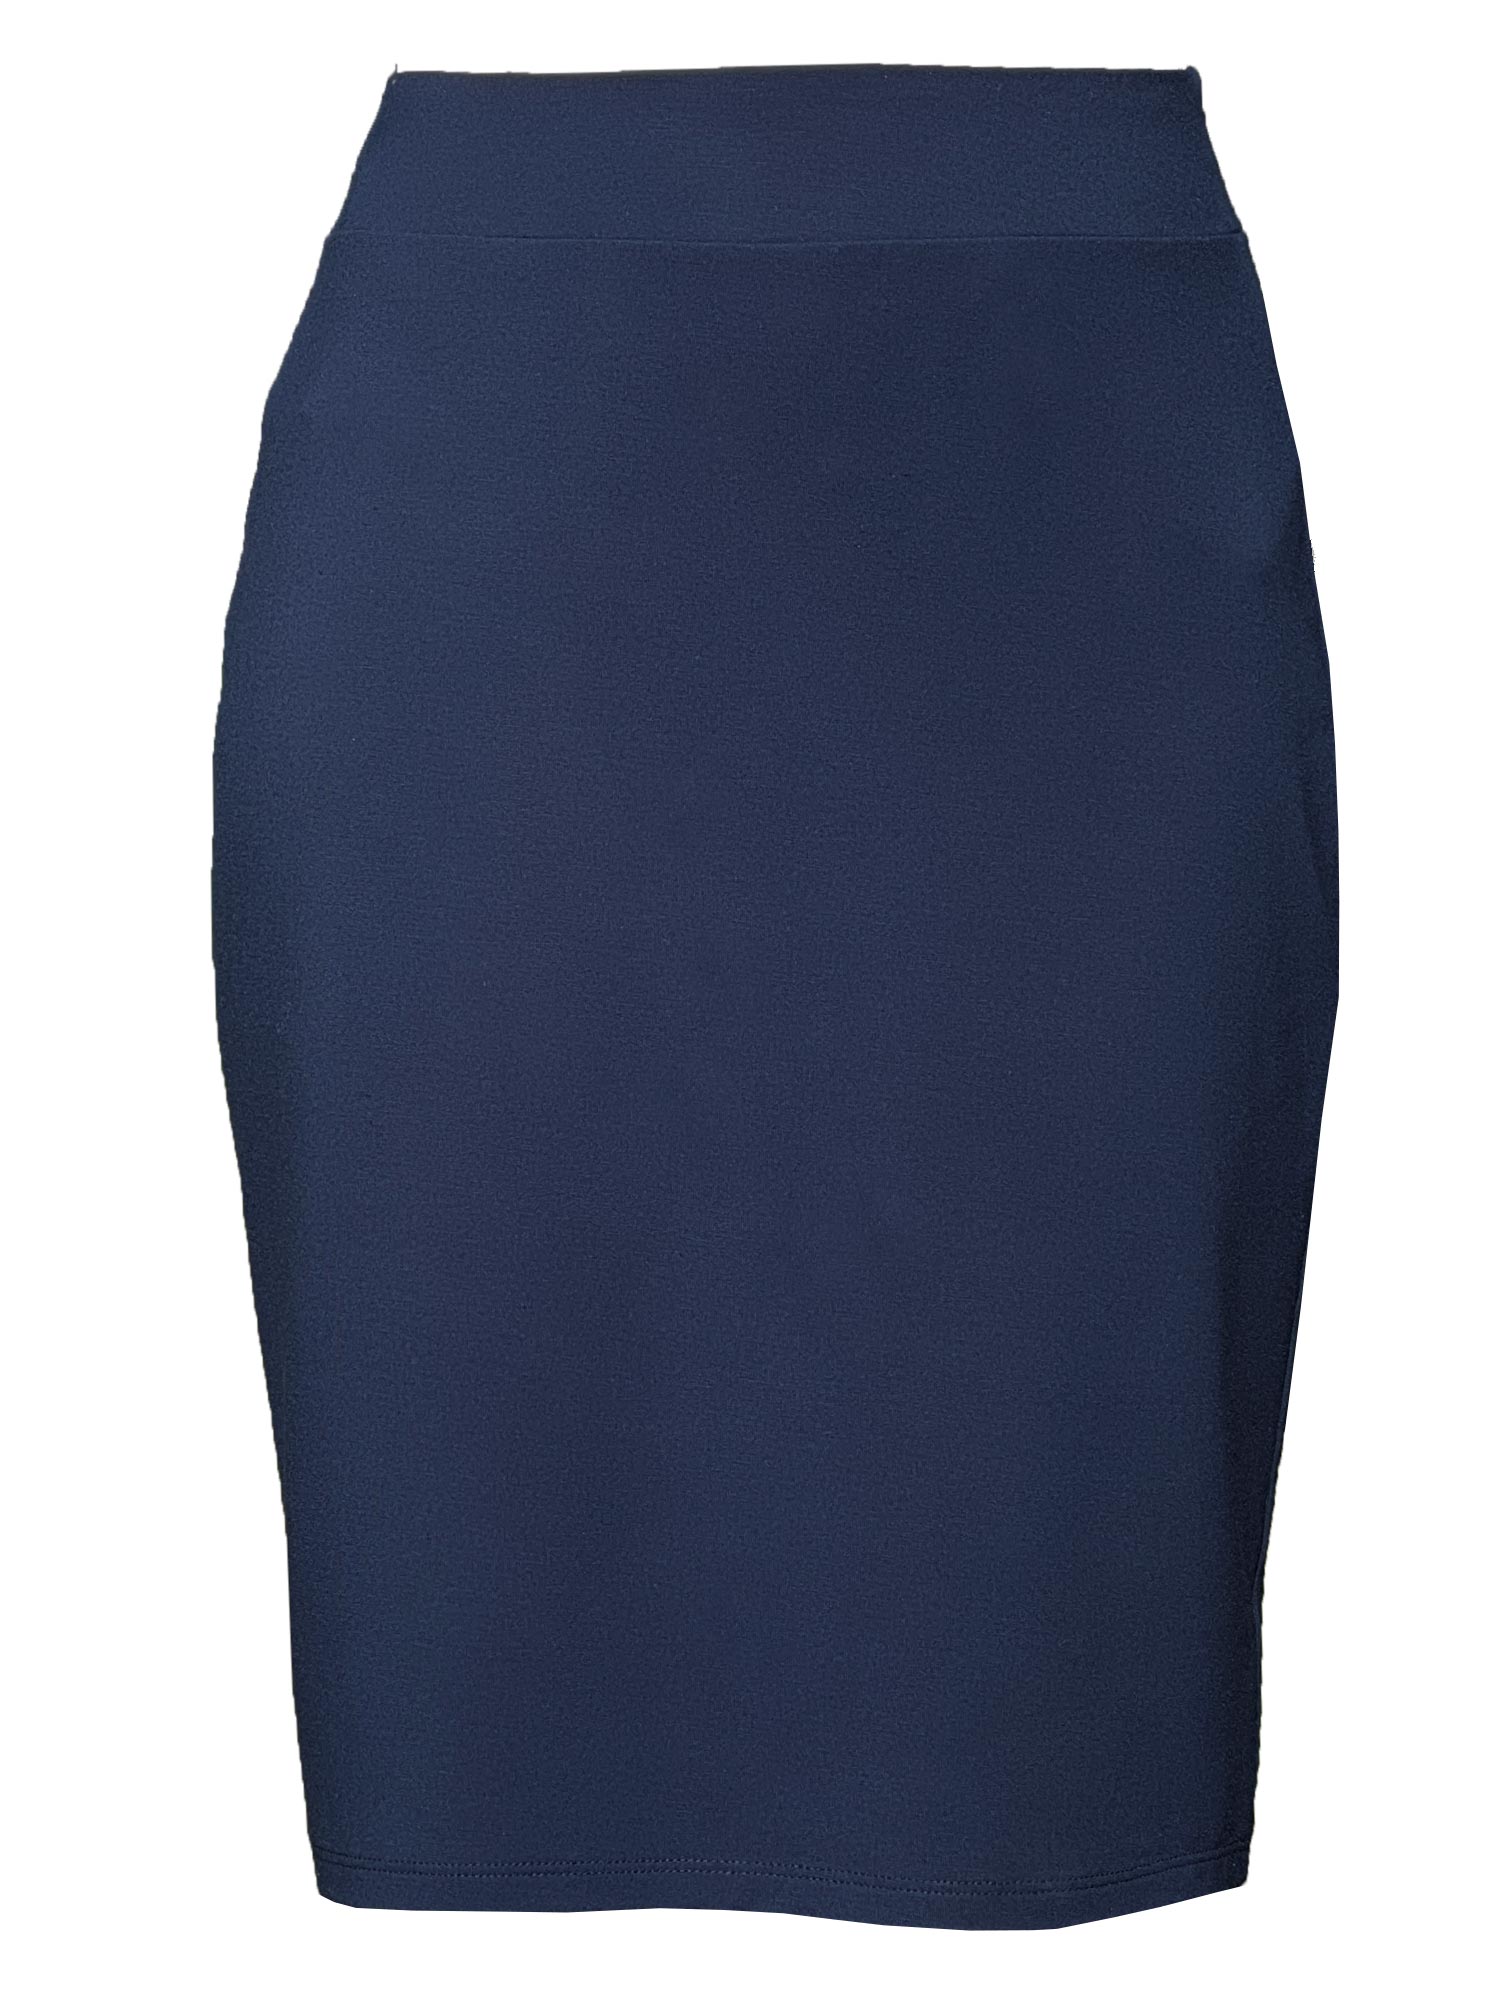 Jilly pull-on pencil skirt, Sustainable women's fashion made in Canada